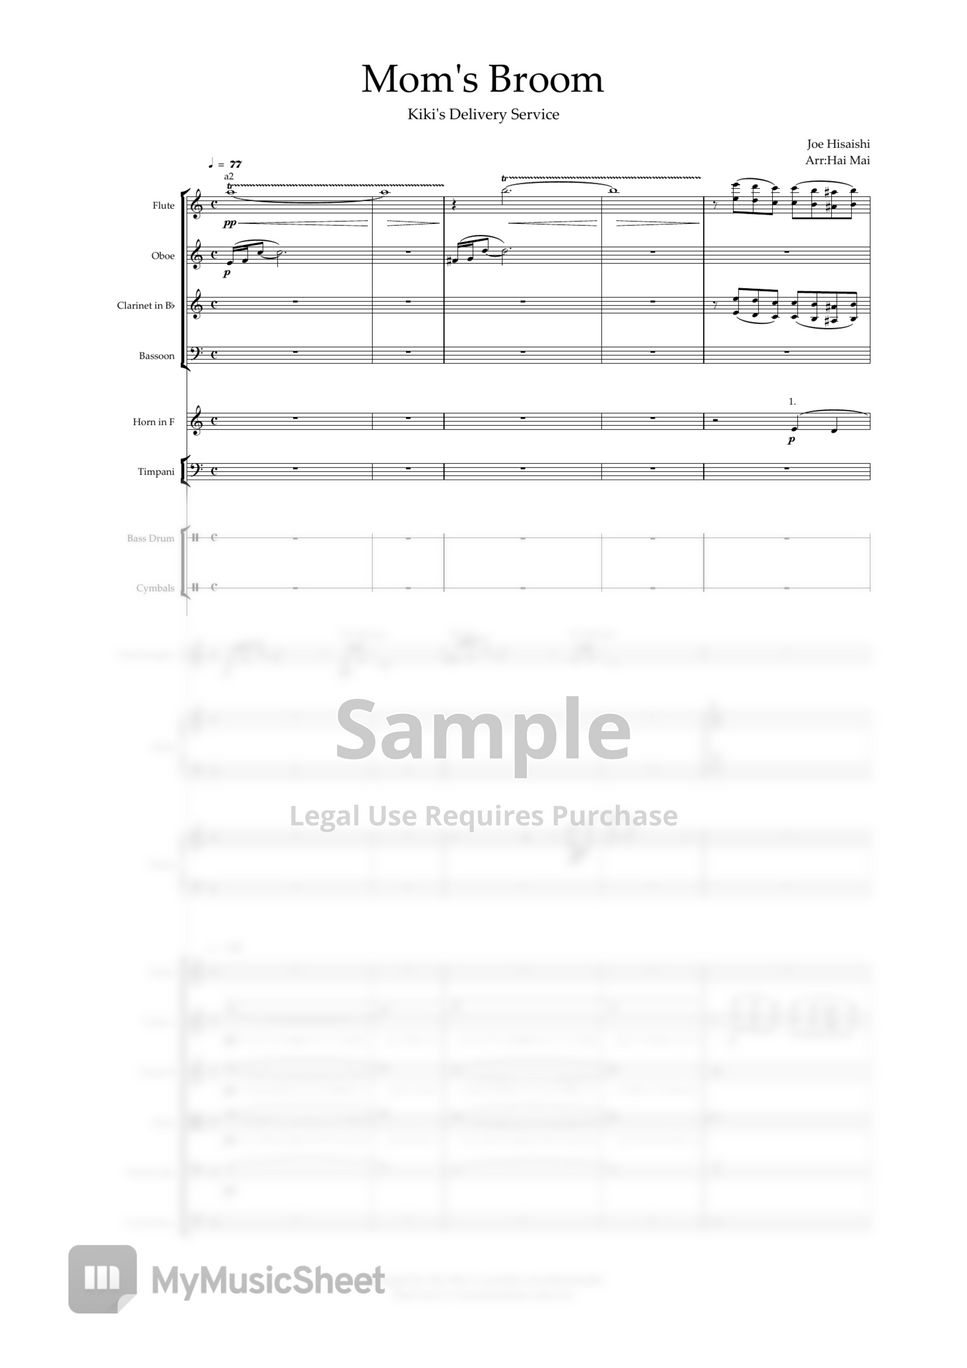 Joe Hisaishi - Mom's Broom(Kiki's Delivery Service) for Orchestra - Score and Part by Hai Mai